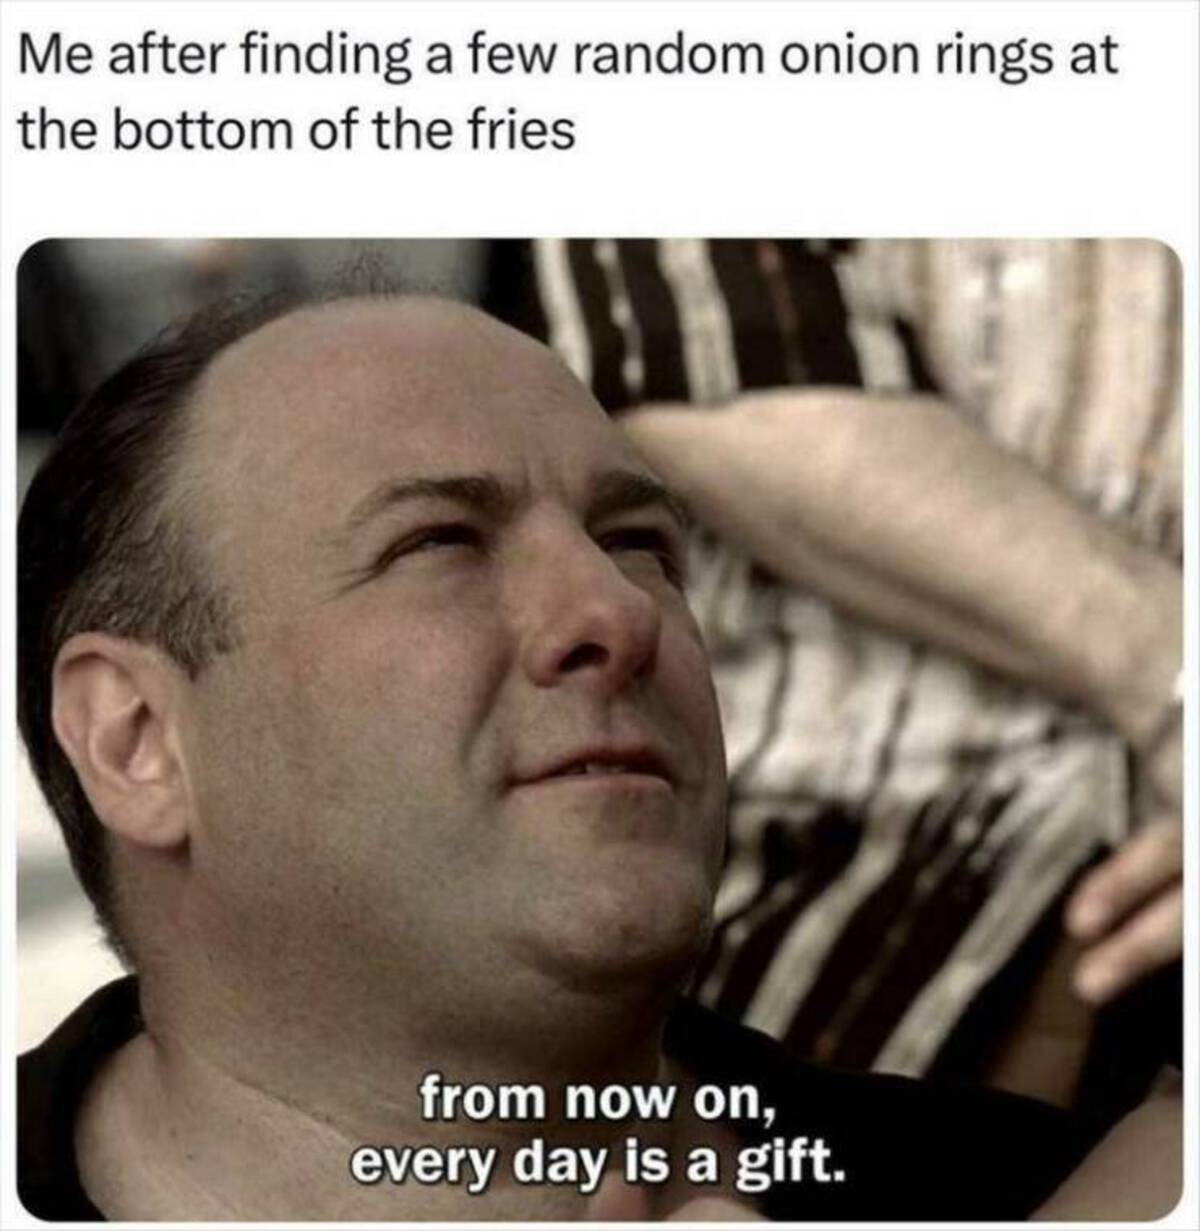 meme of day - Me after finding a few random onion rings at the bottom of the fries from now on, every day is a gift.